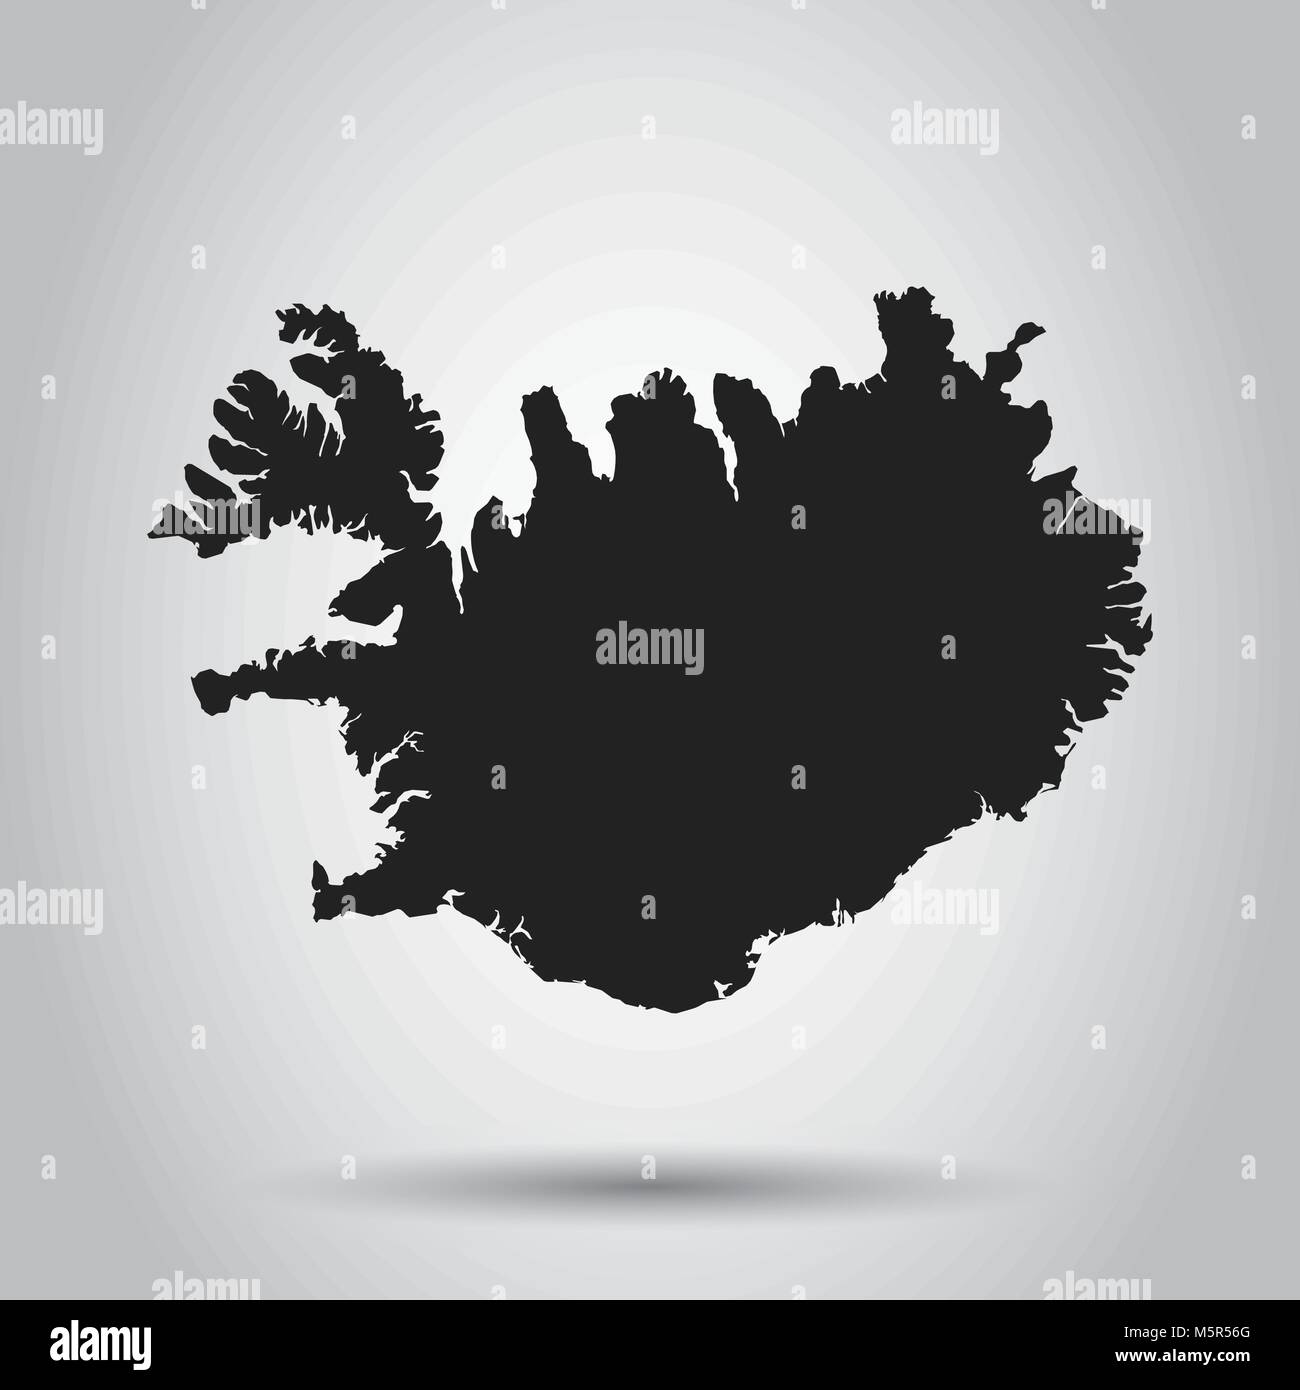 Iceland vector map. Black icon on white background. Stock Vector